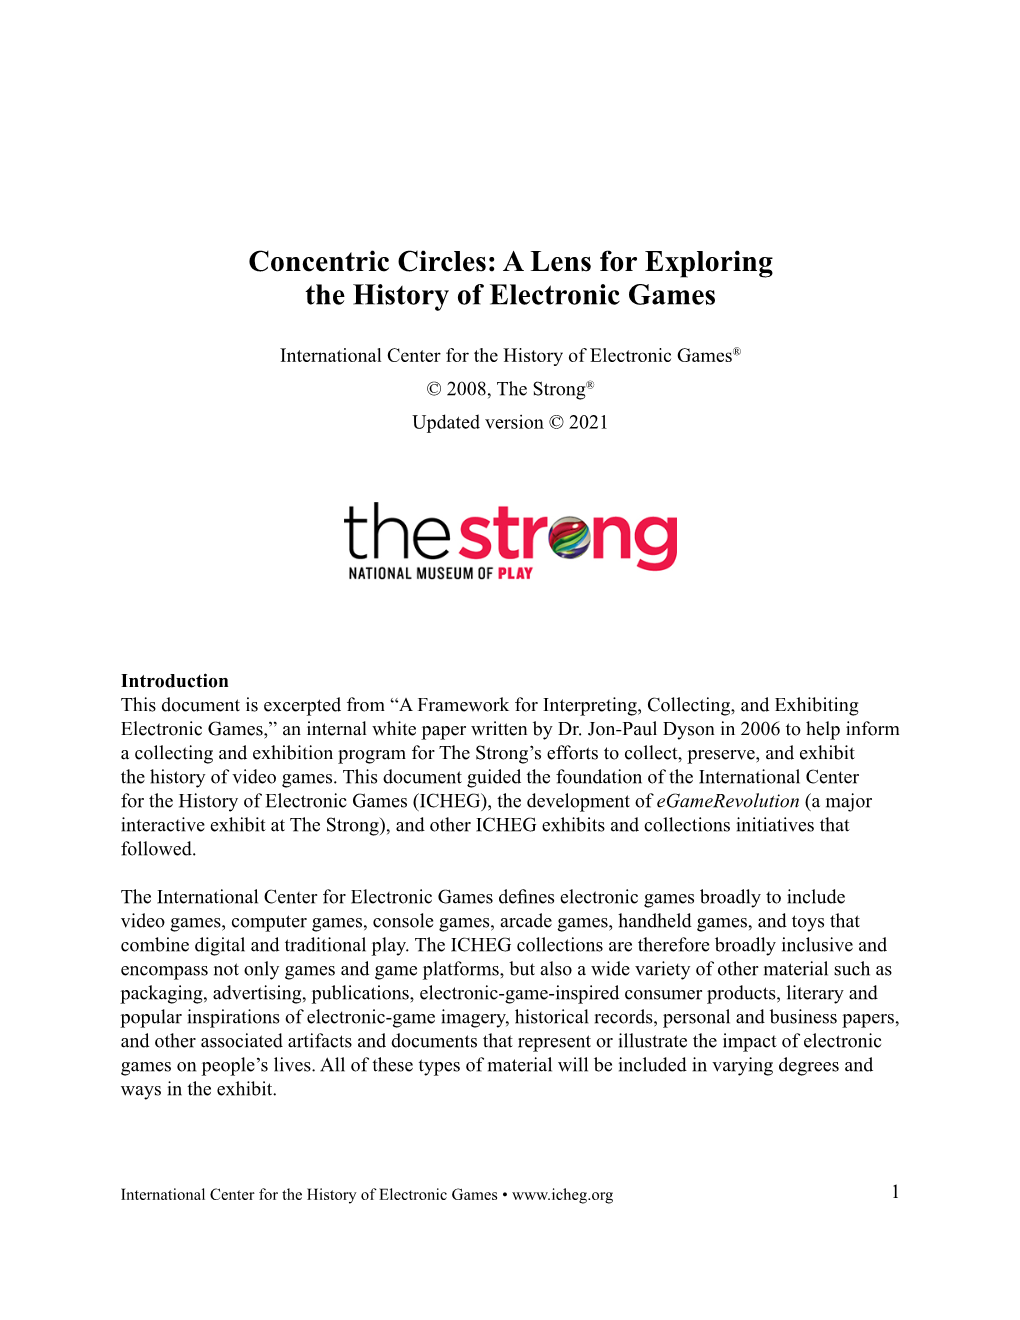 Concentric Circles: a Lens for Exploring the History of Electronic Games